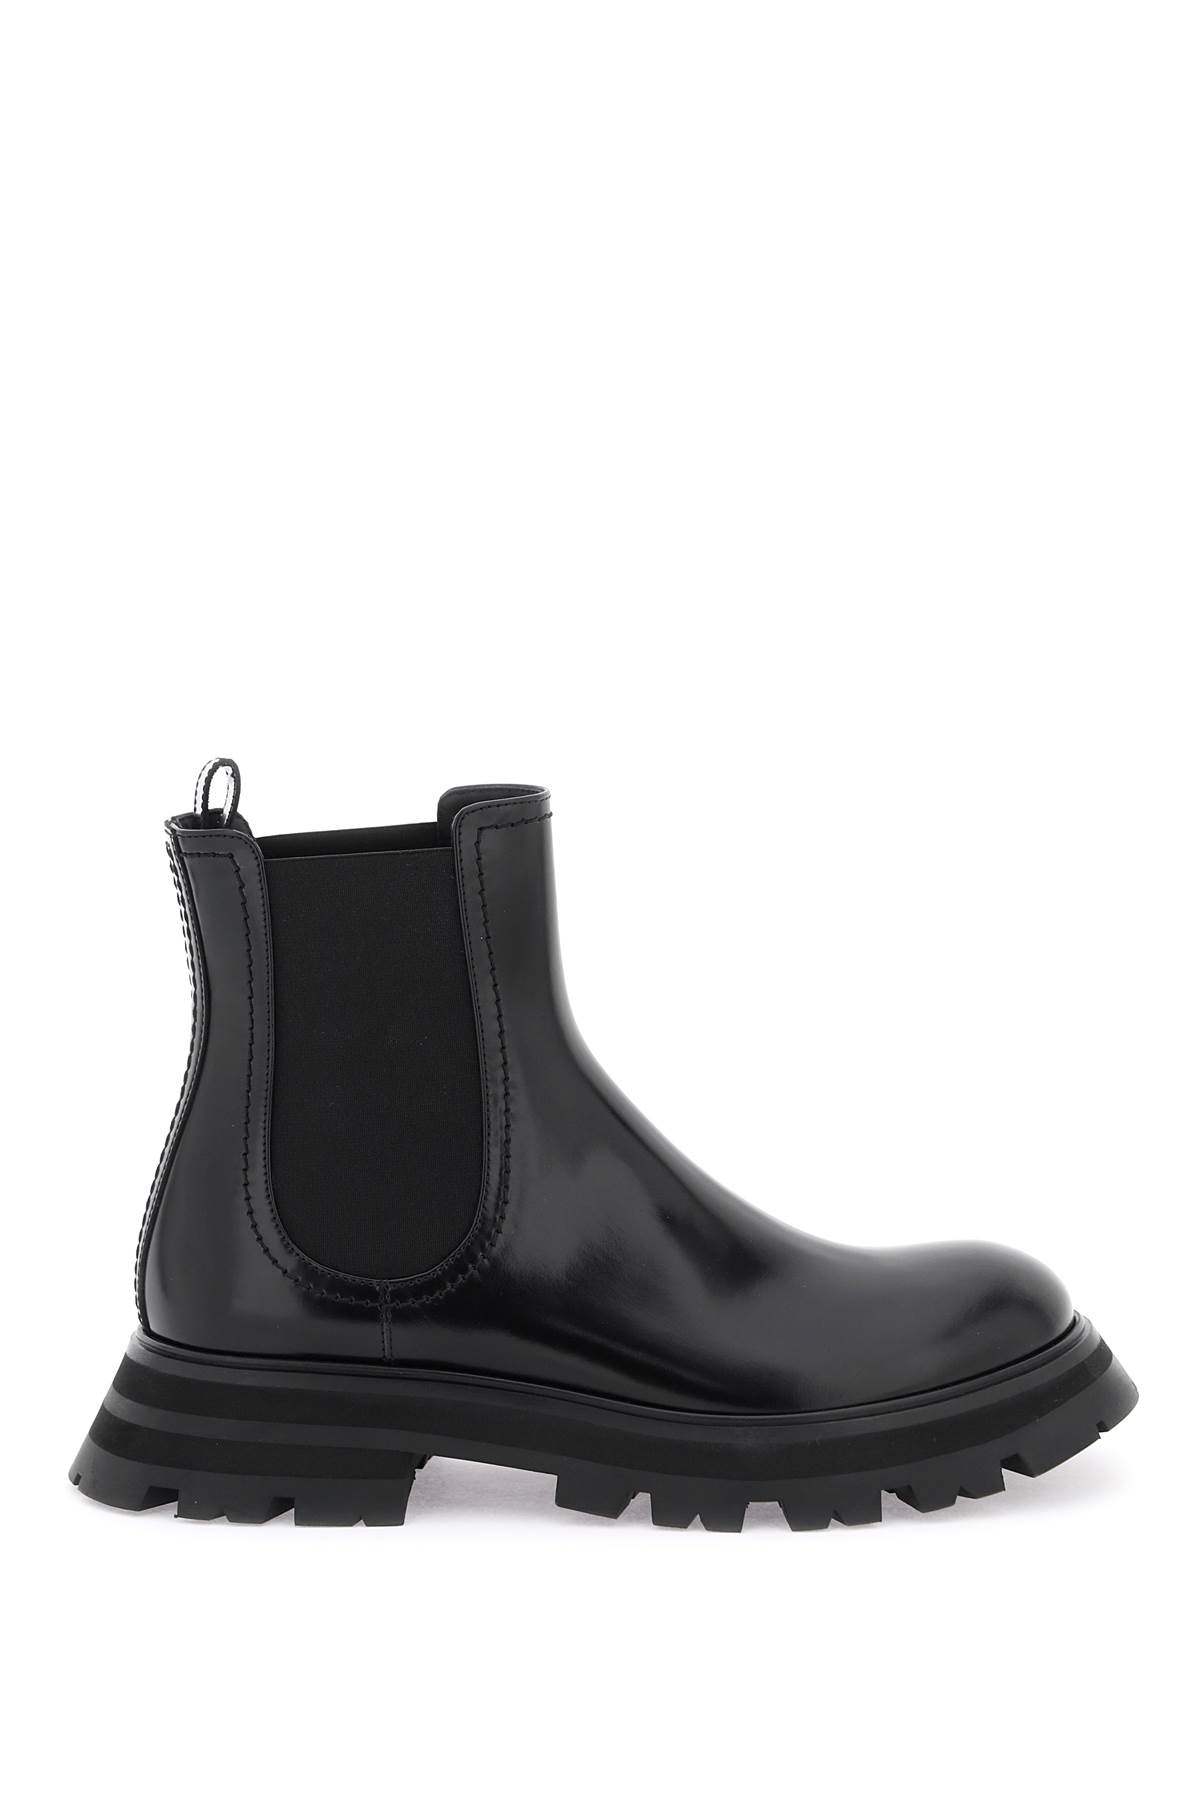 Alexander mcqueen shiny leather chelsea boots-0